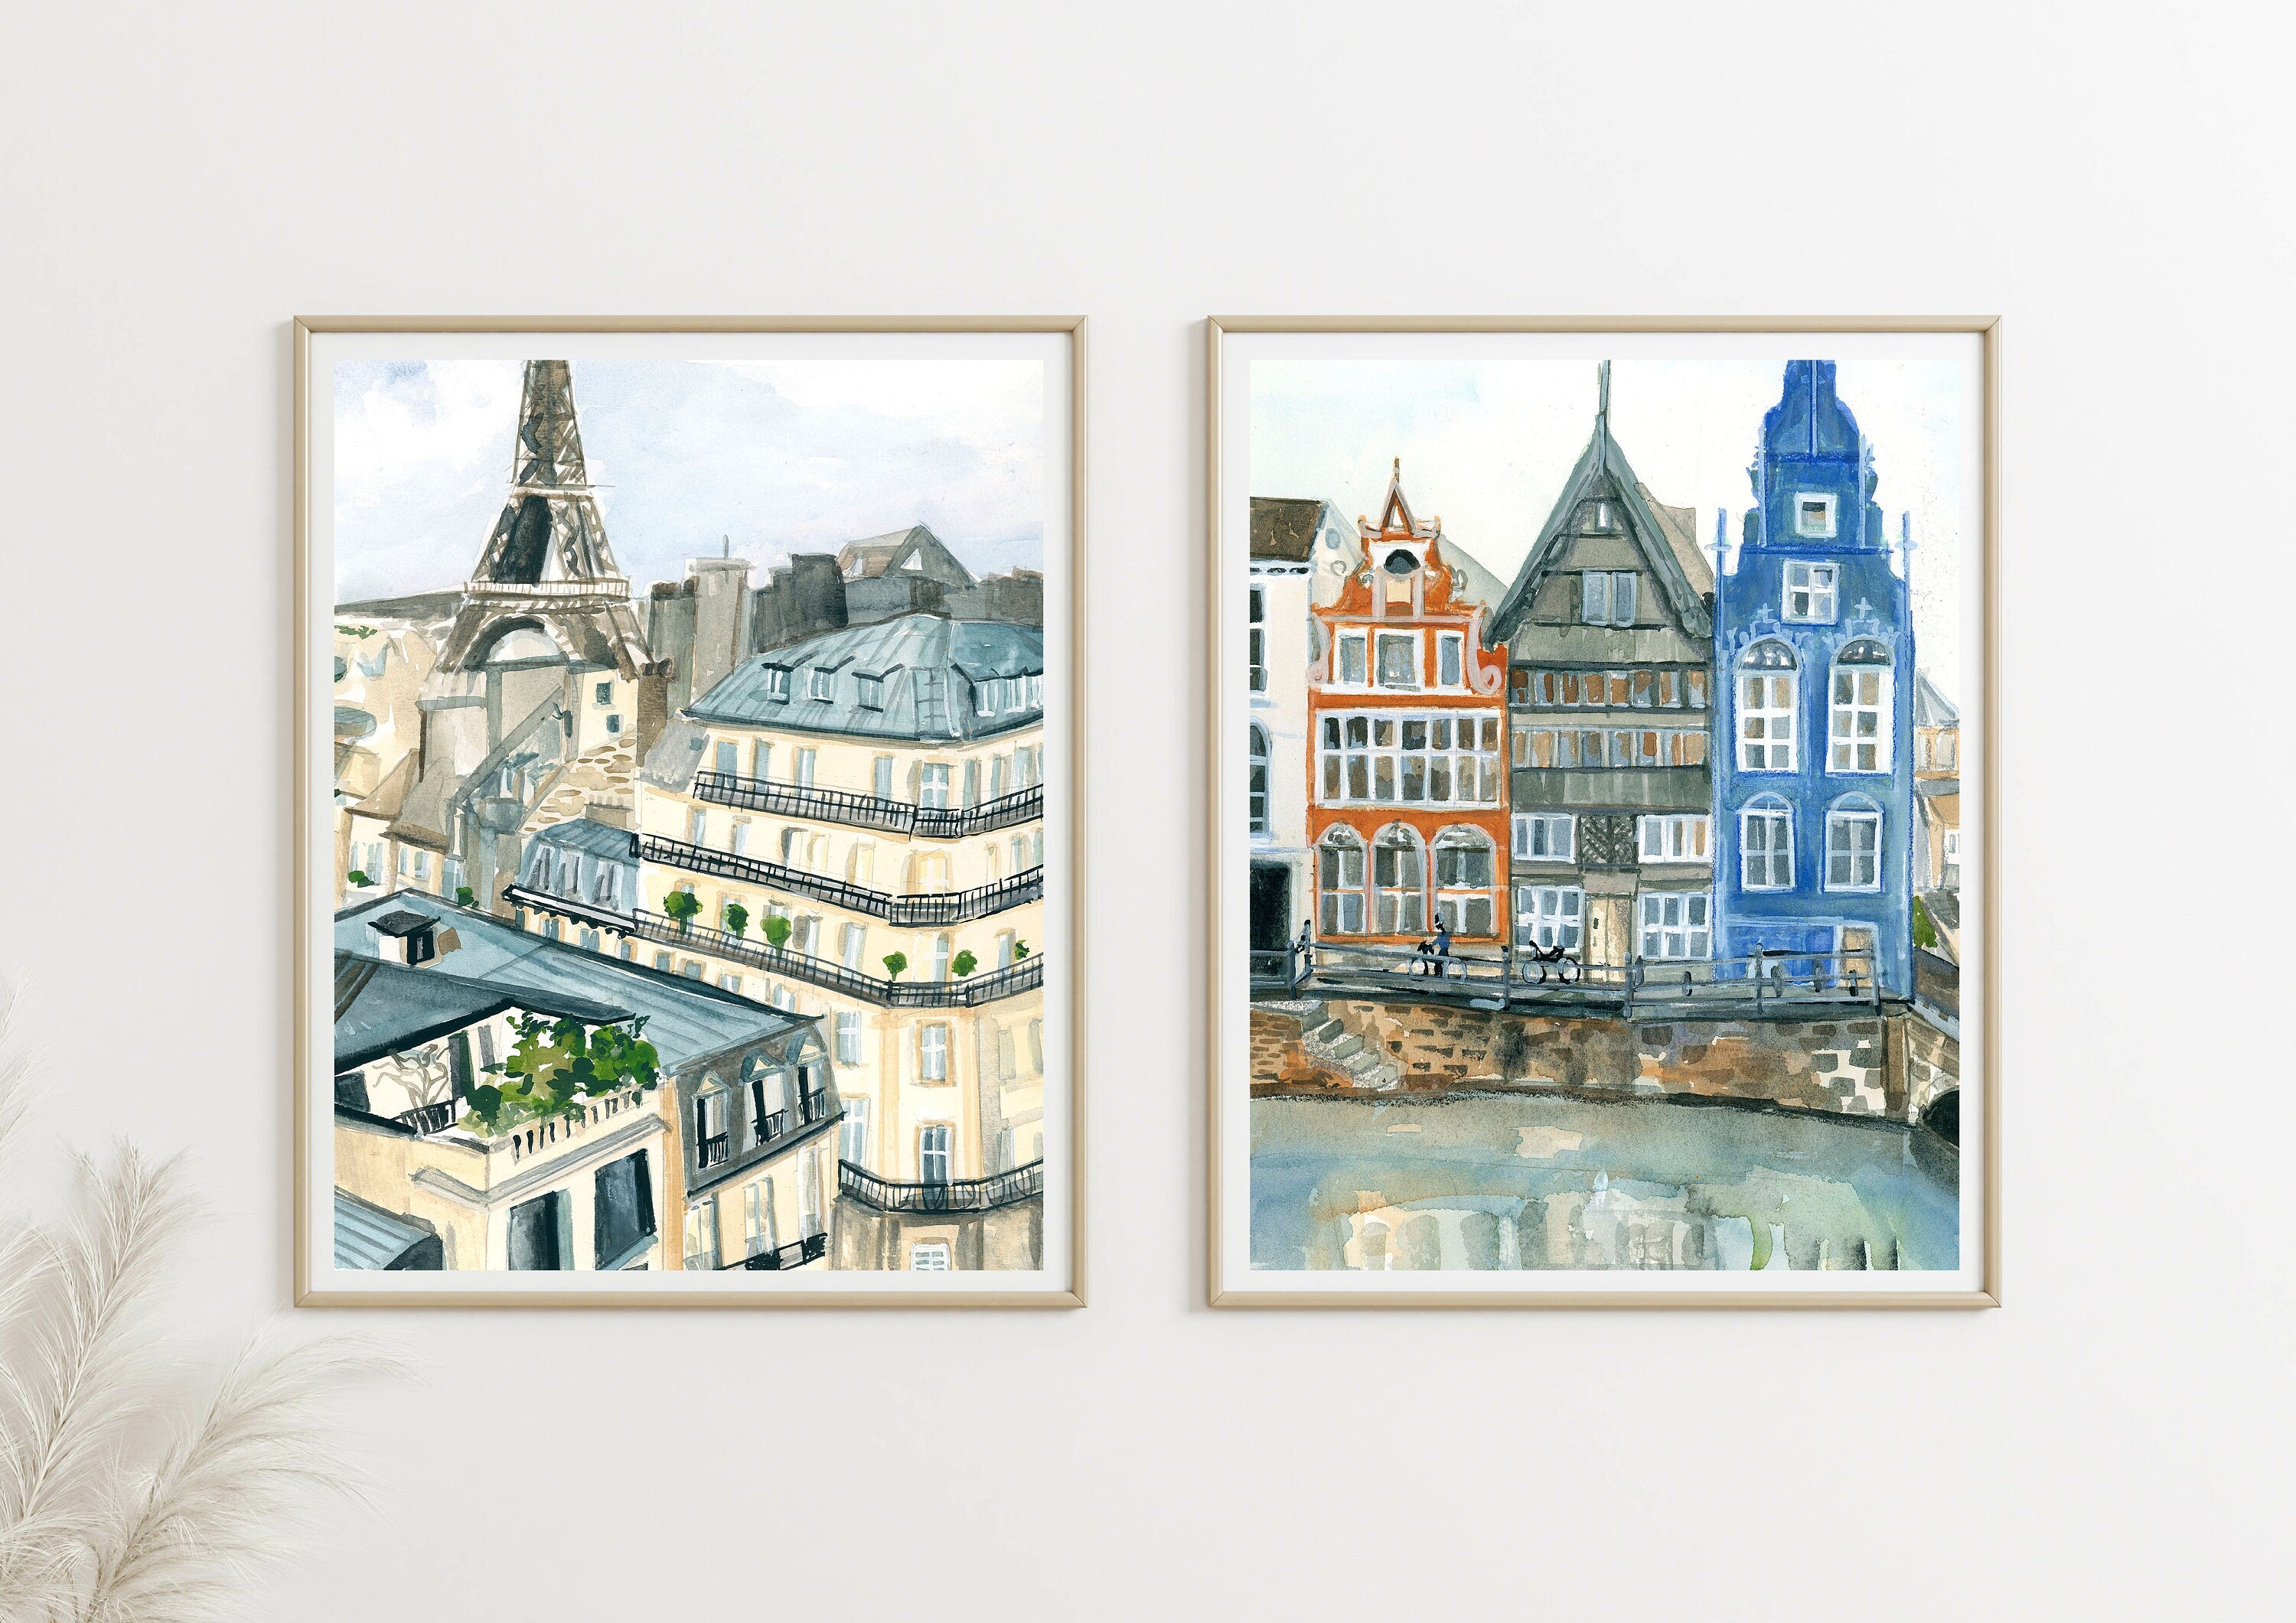 Brugge canal and buildings print of painting by Medjool Studio. Print of original gouache painting with neutral tones that captures the traditional buildings and cliffs of the Amalfi coast in Italy.